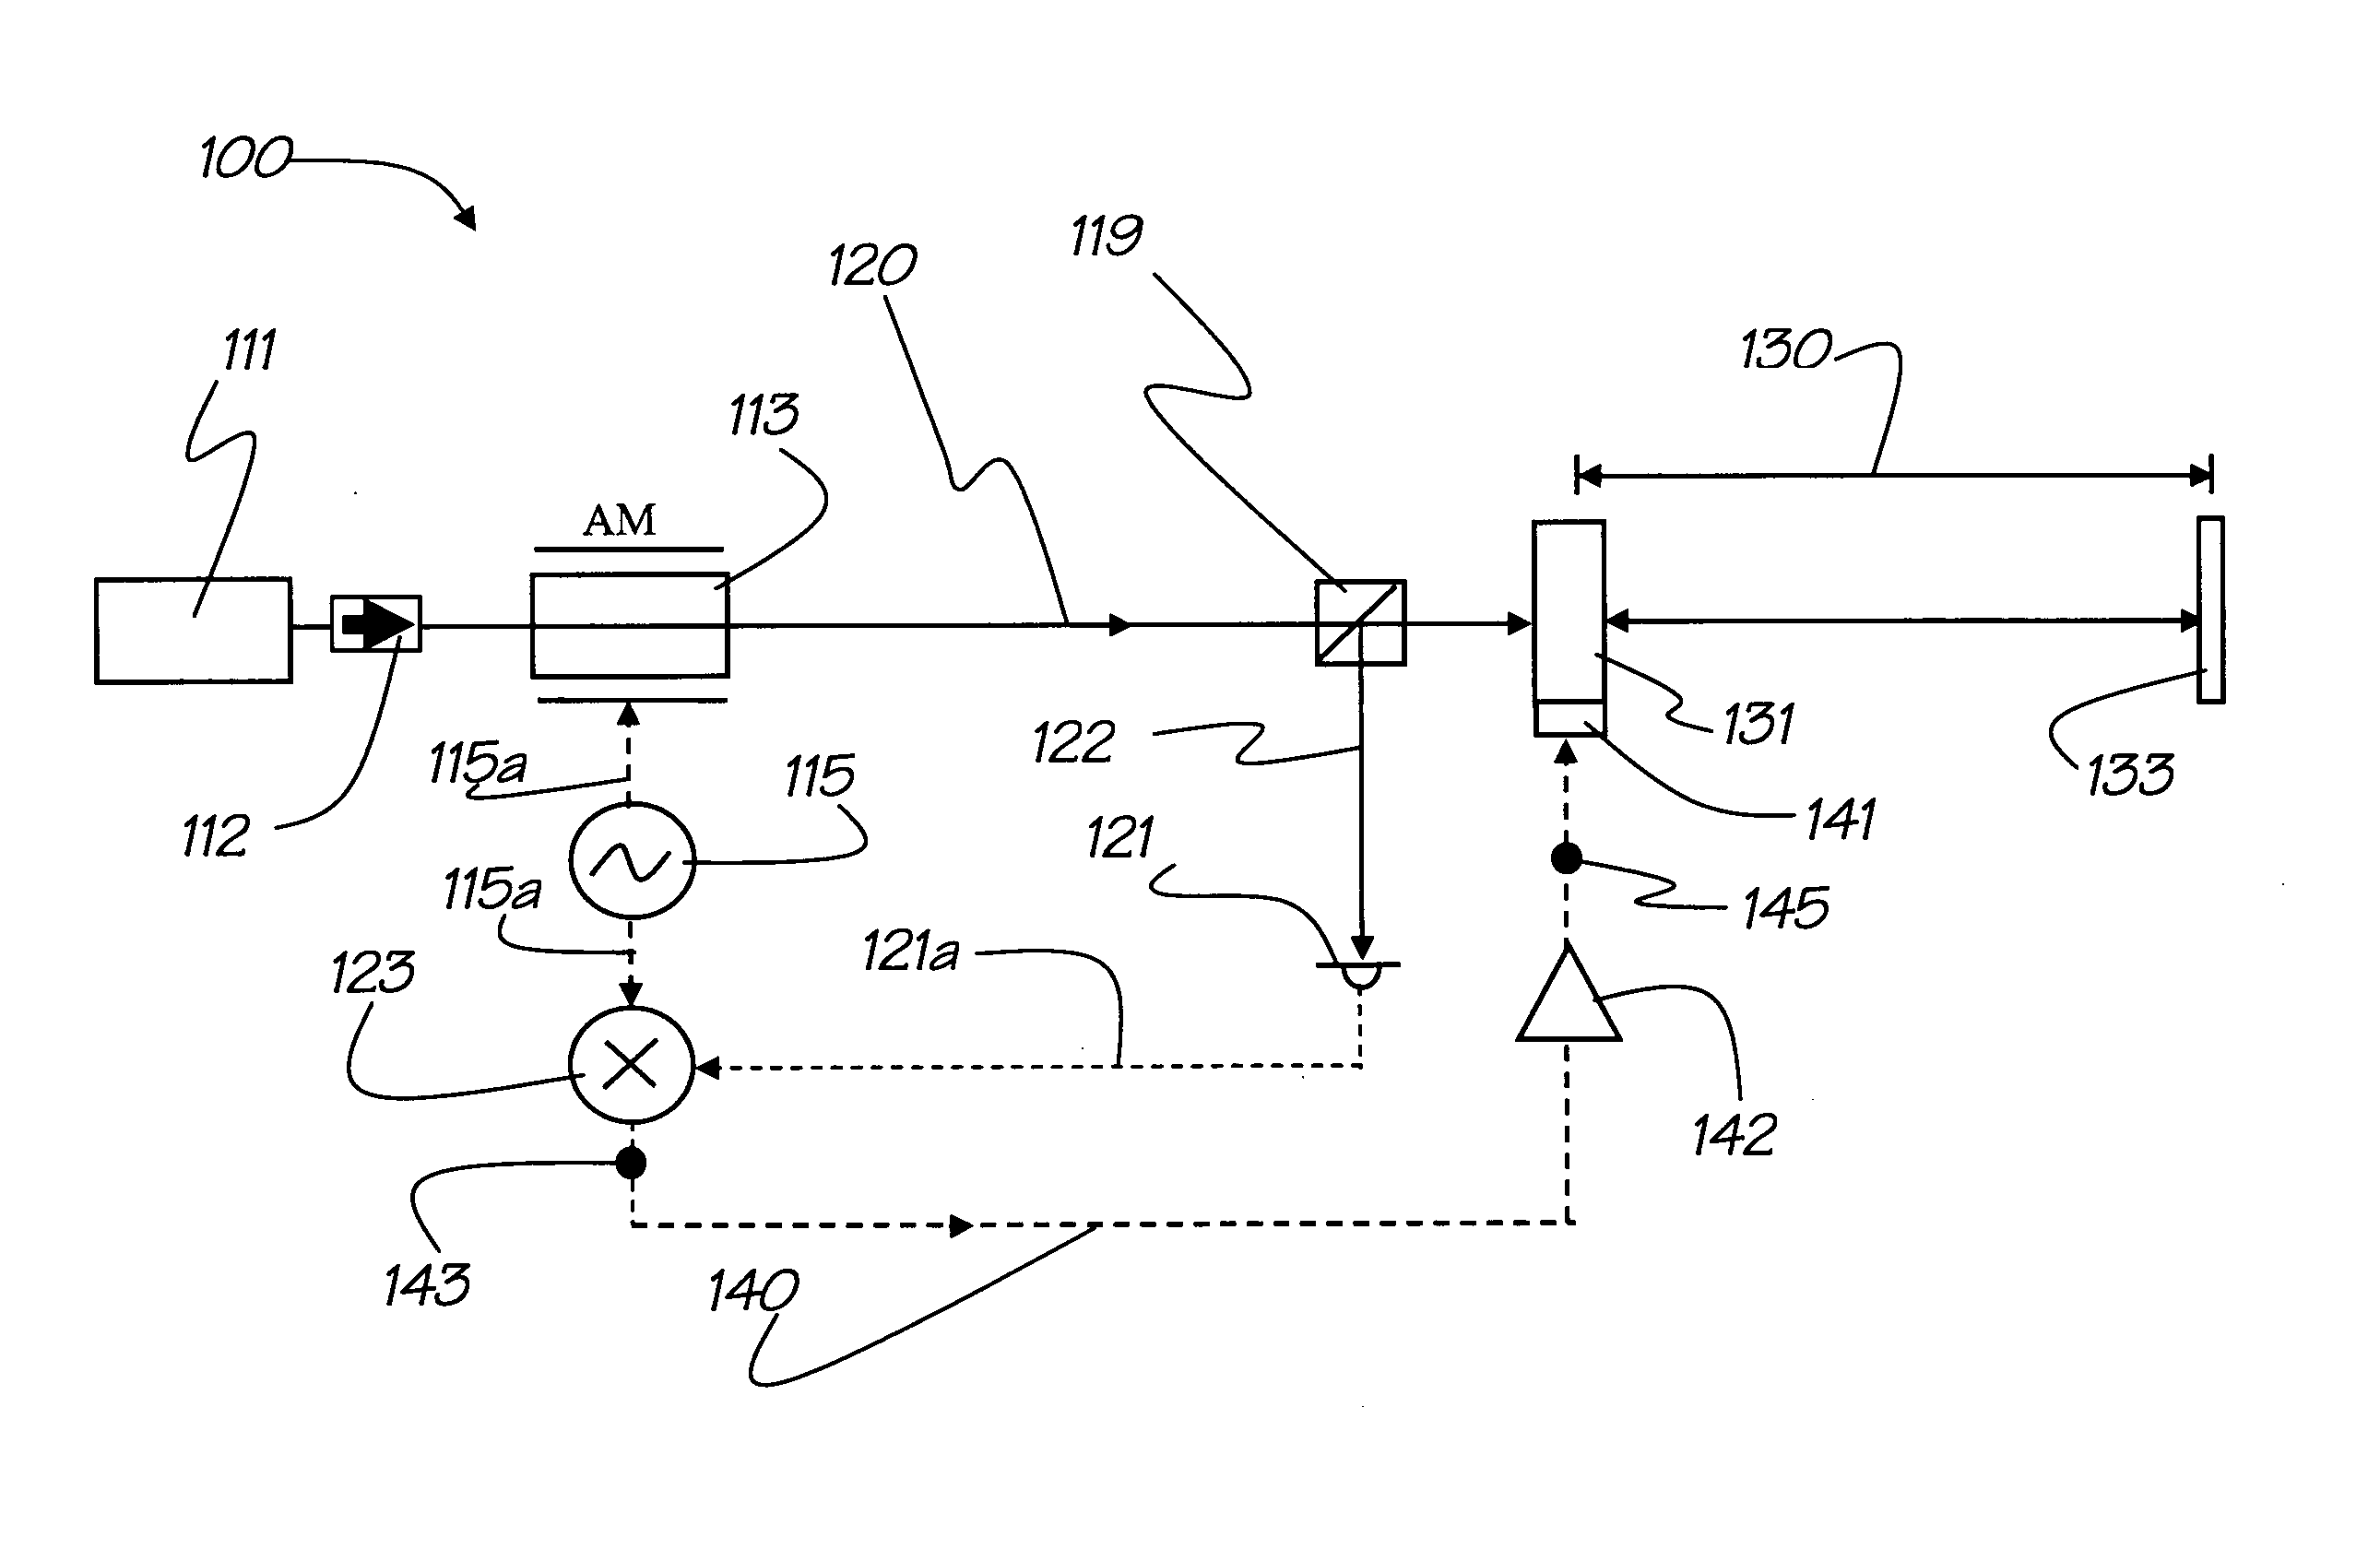 Spectroscopic detection system and method